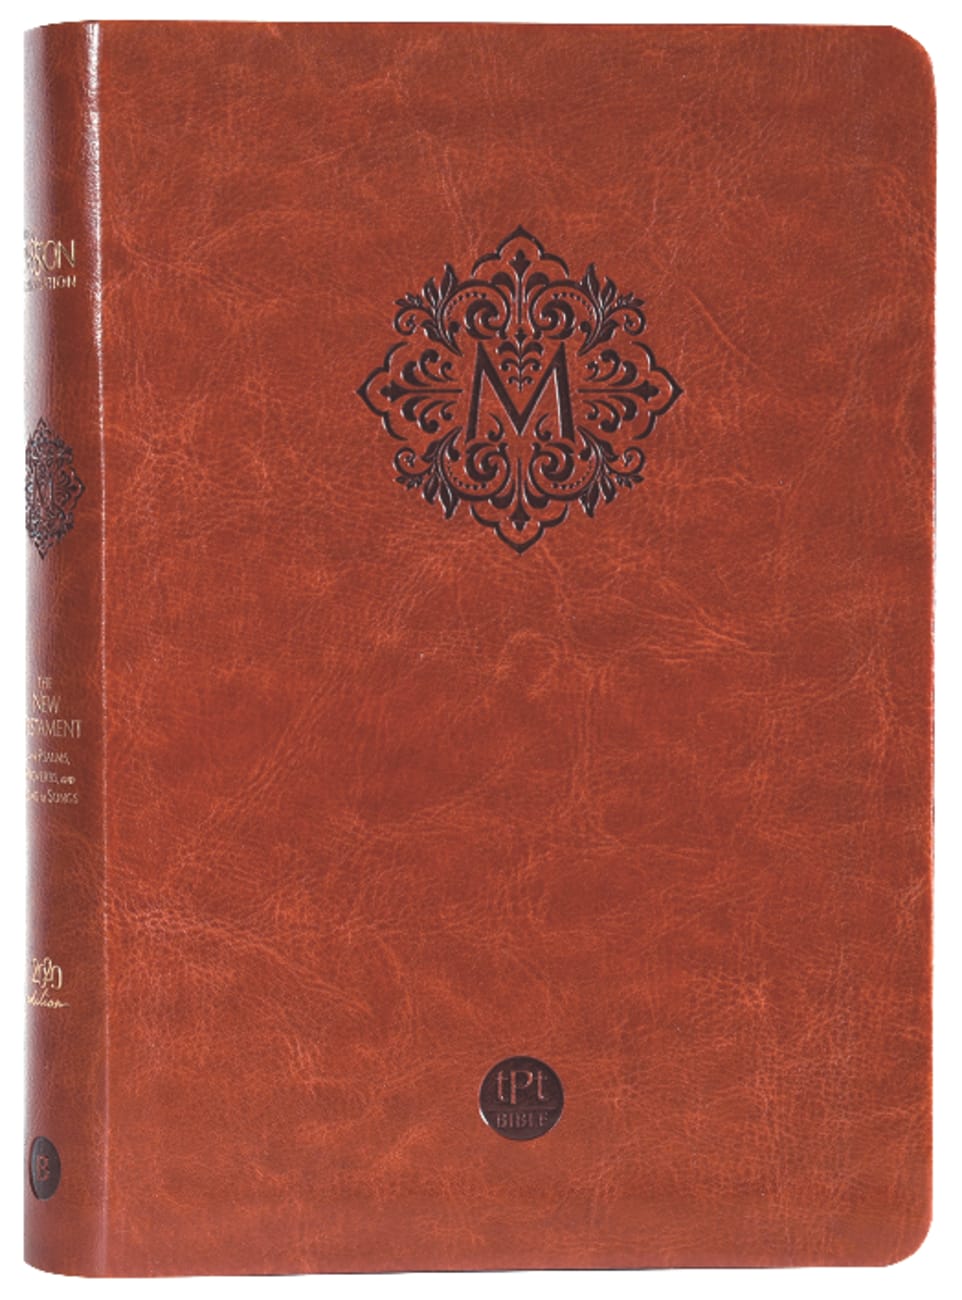 TPT New Testament Masterpiece Edition (With Psalms Proverbs And Song Of Songs) Imitation Leather